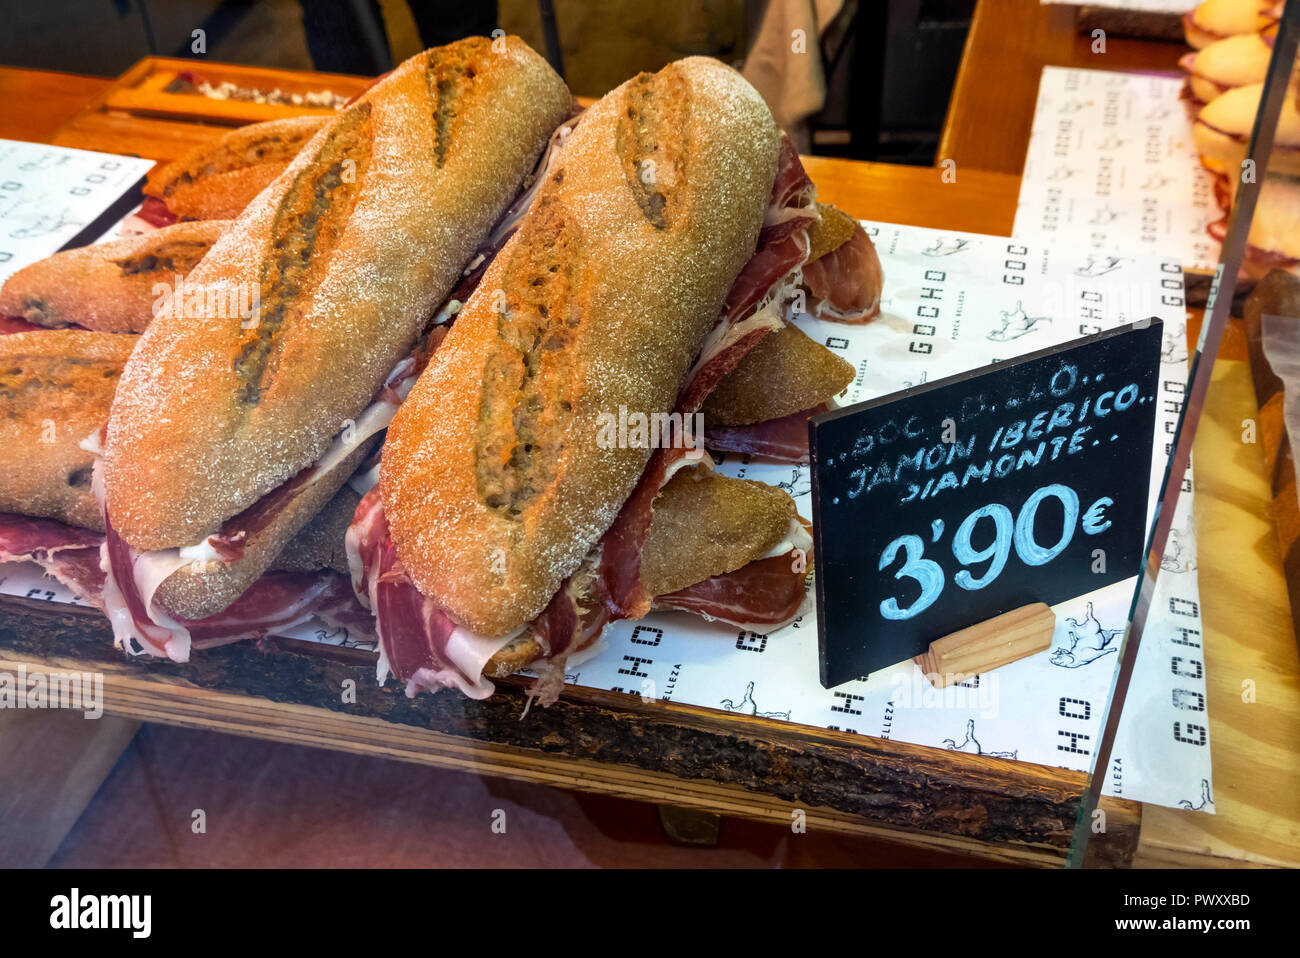 Two large sandwiches on crusty bread with Acorn-fed Iberian Ham (Serrano Ham) selling for 3,90 euros in the window of a Seville cafe Stock Photo